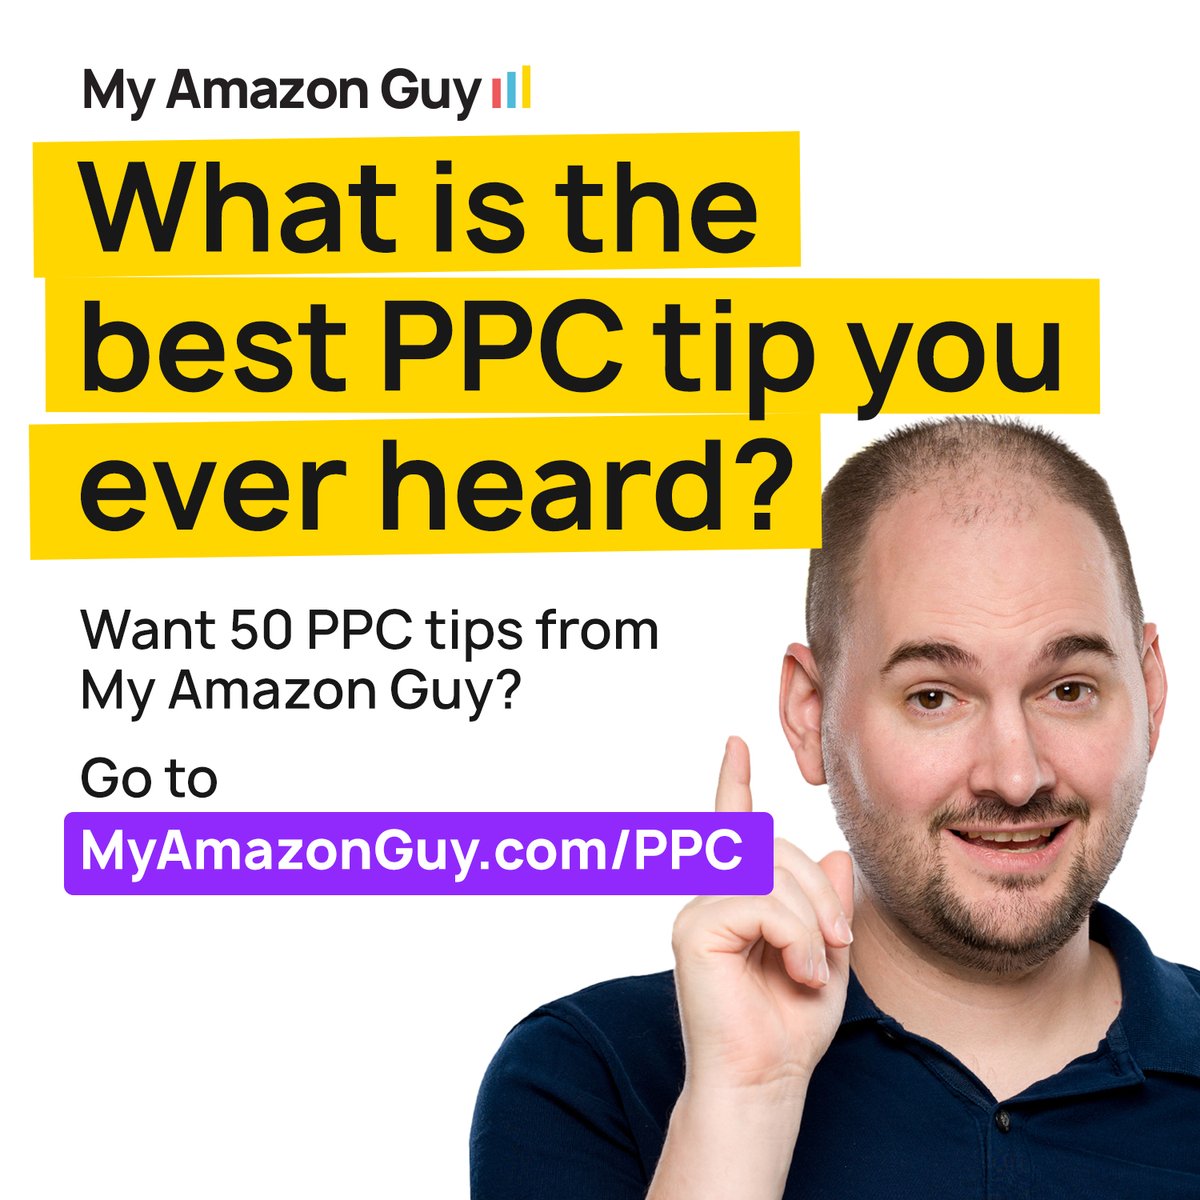 What's the best PPC tip you have ever heard?

Steven Pope's BEST 50 tips are at MyAmazonGuy.com/PPC

#ppcagency
#ppcservices
#ppccampaign
#ppcstrategy
#ppccampaigns
#amazonpcctips
#myamazonguy